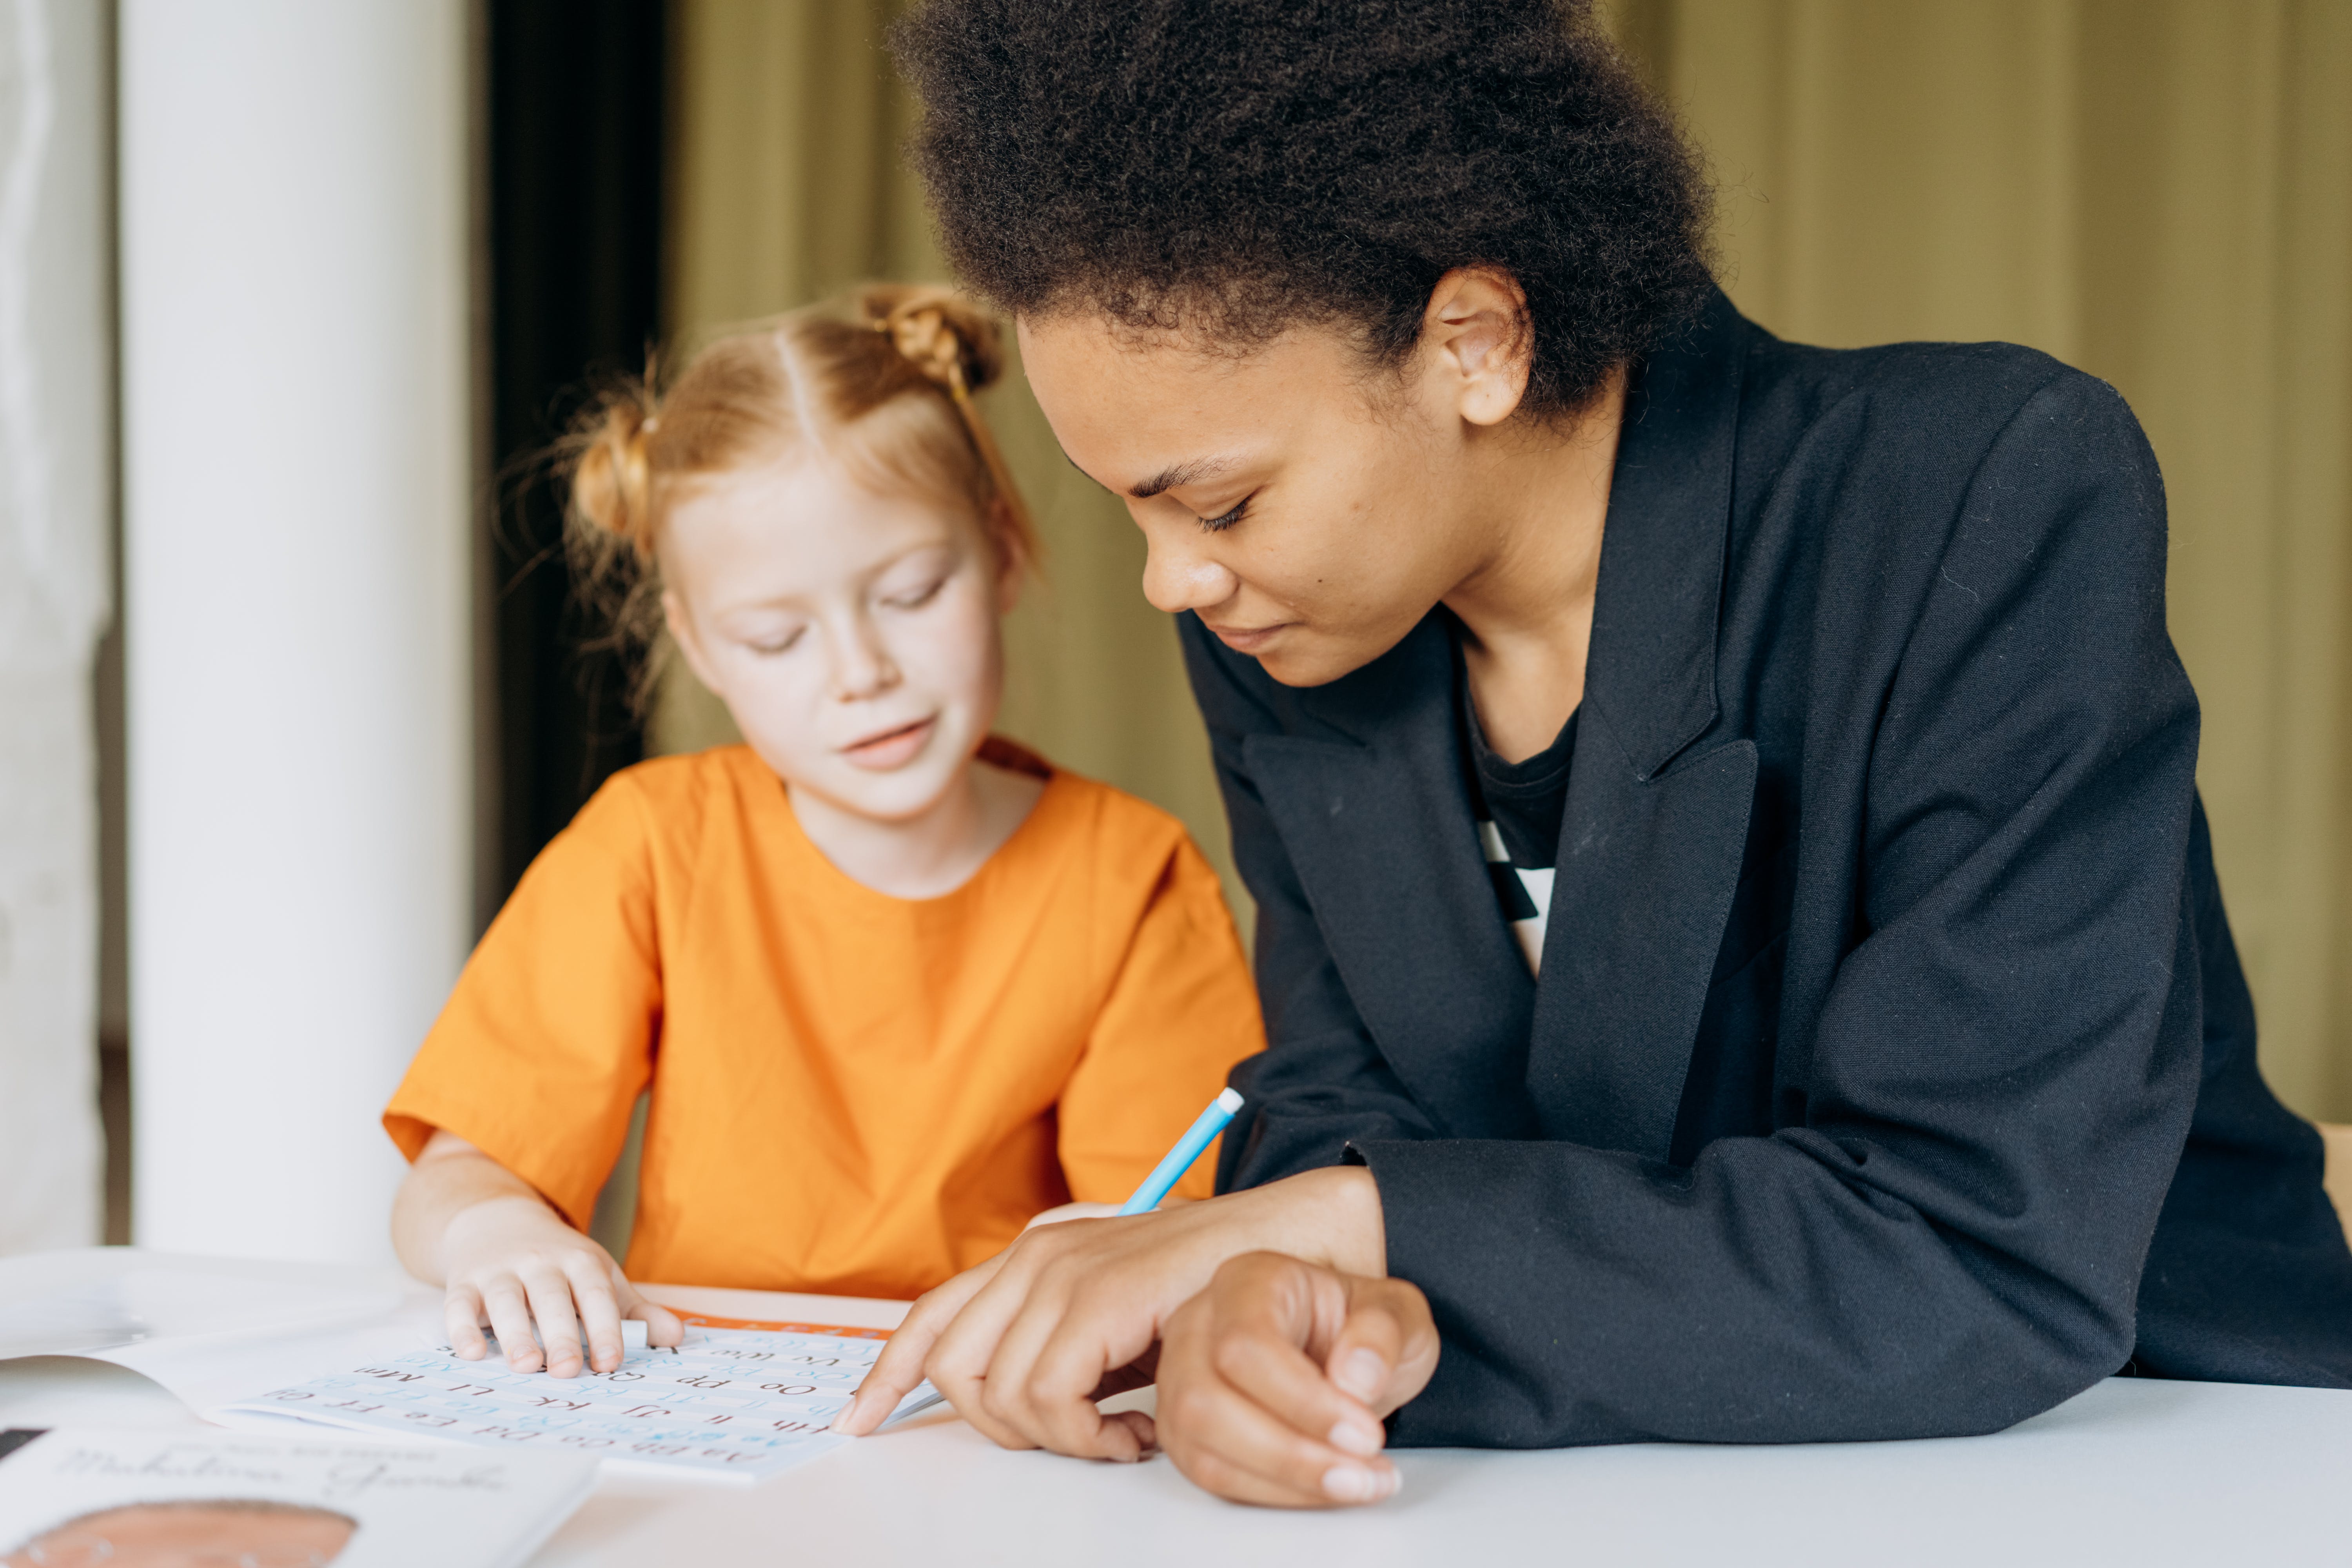 A young girl writing on a workbook sits next to a woman in a blazer.